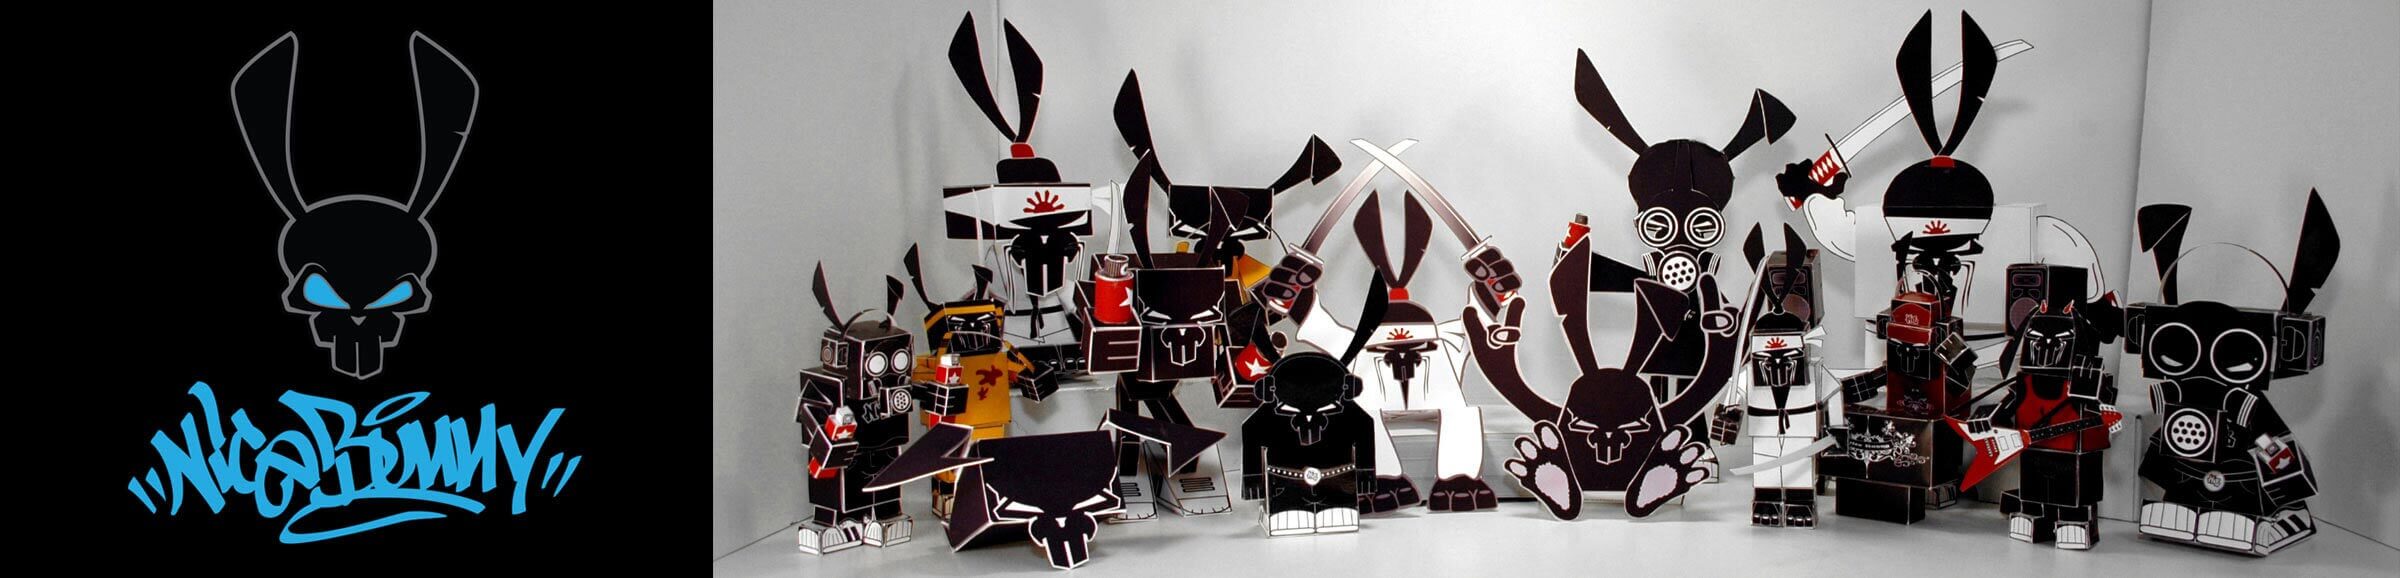 free, paper toys, nicebunny, characters, downloads